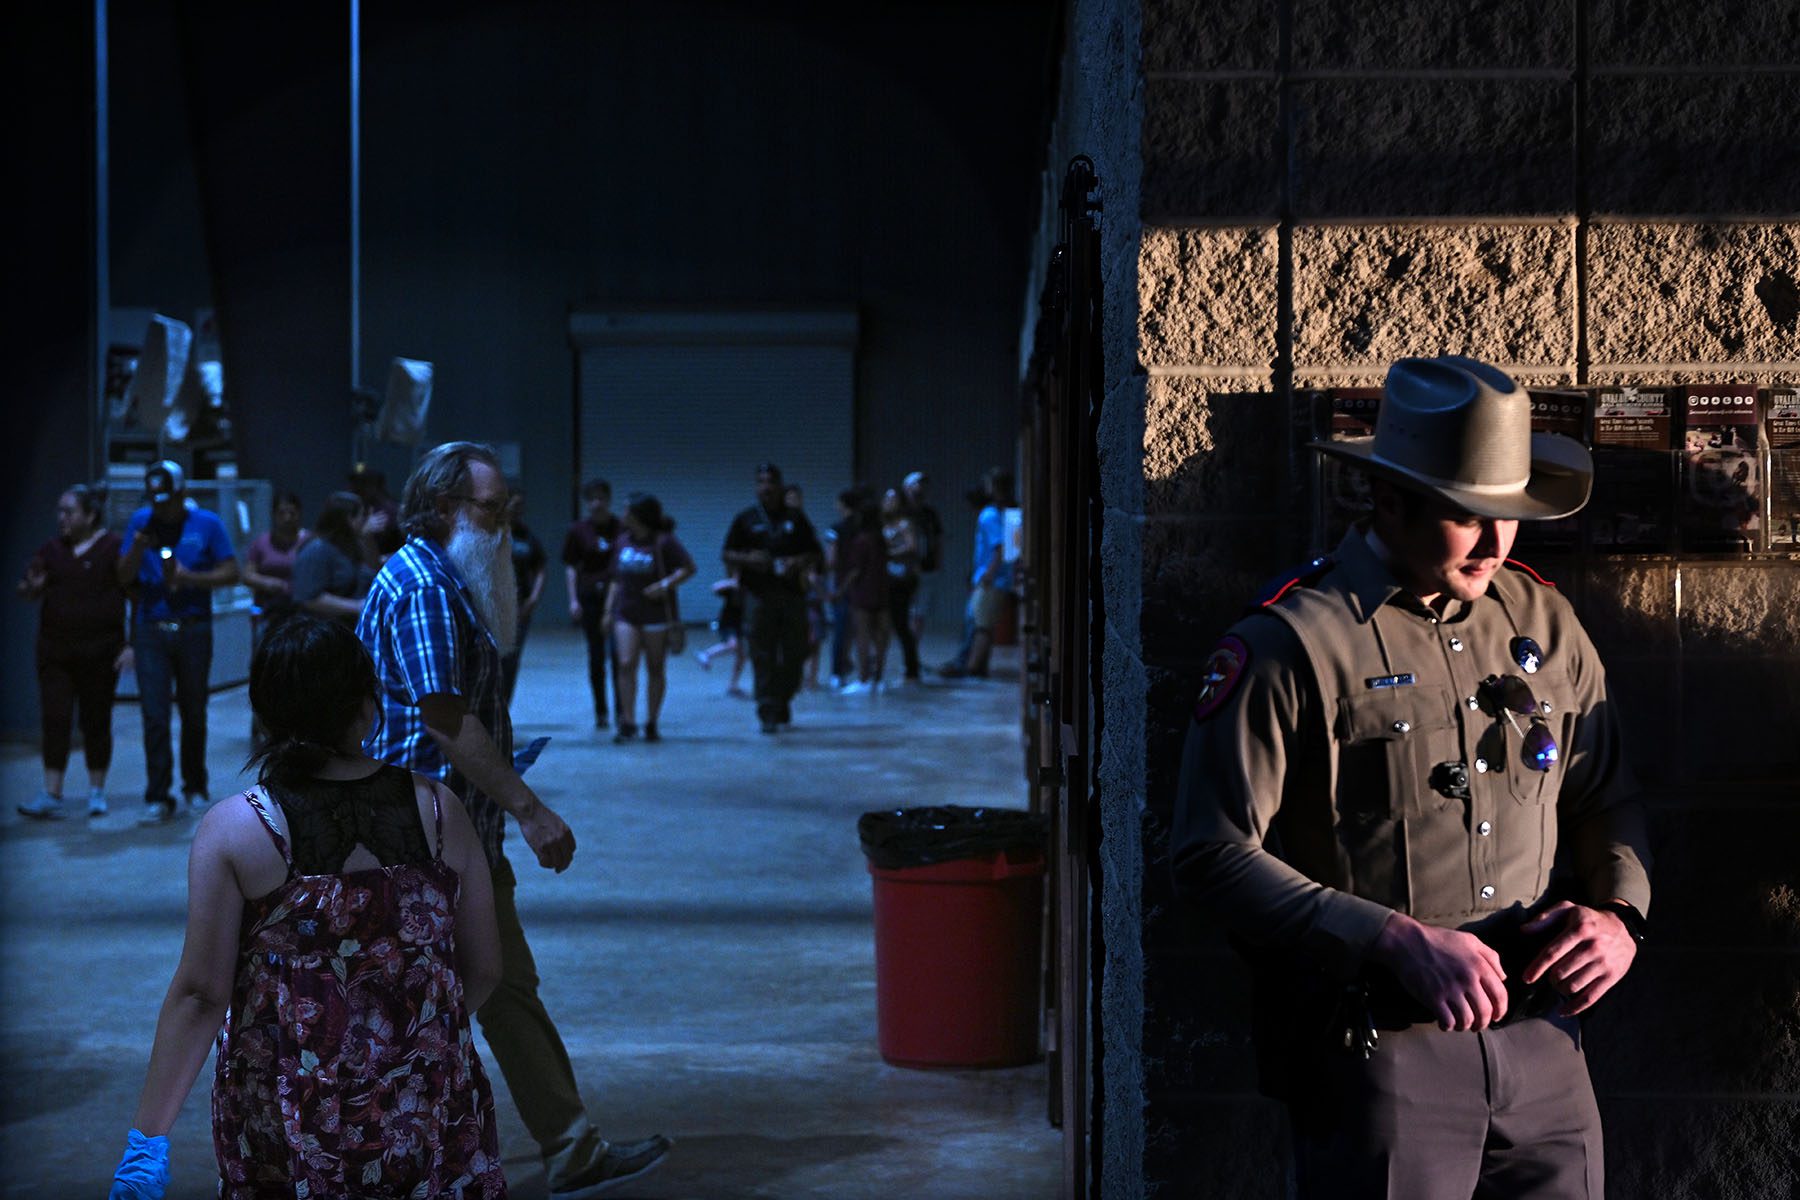 A police officer guards the door of the Uvalde County Fairplex.